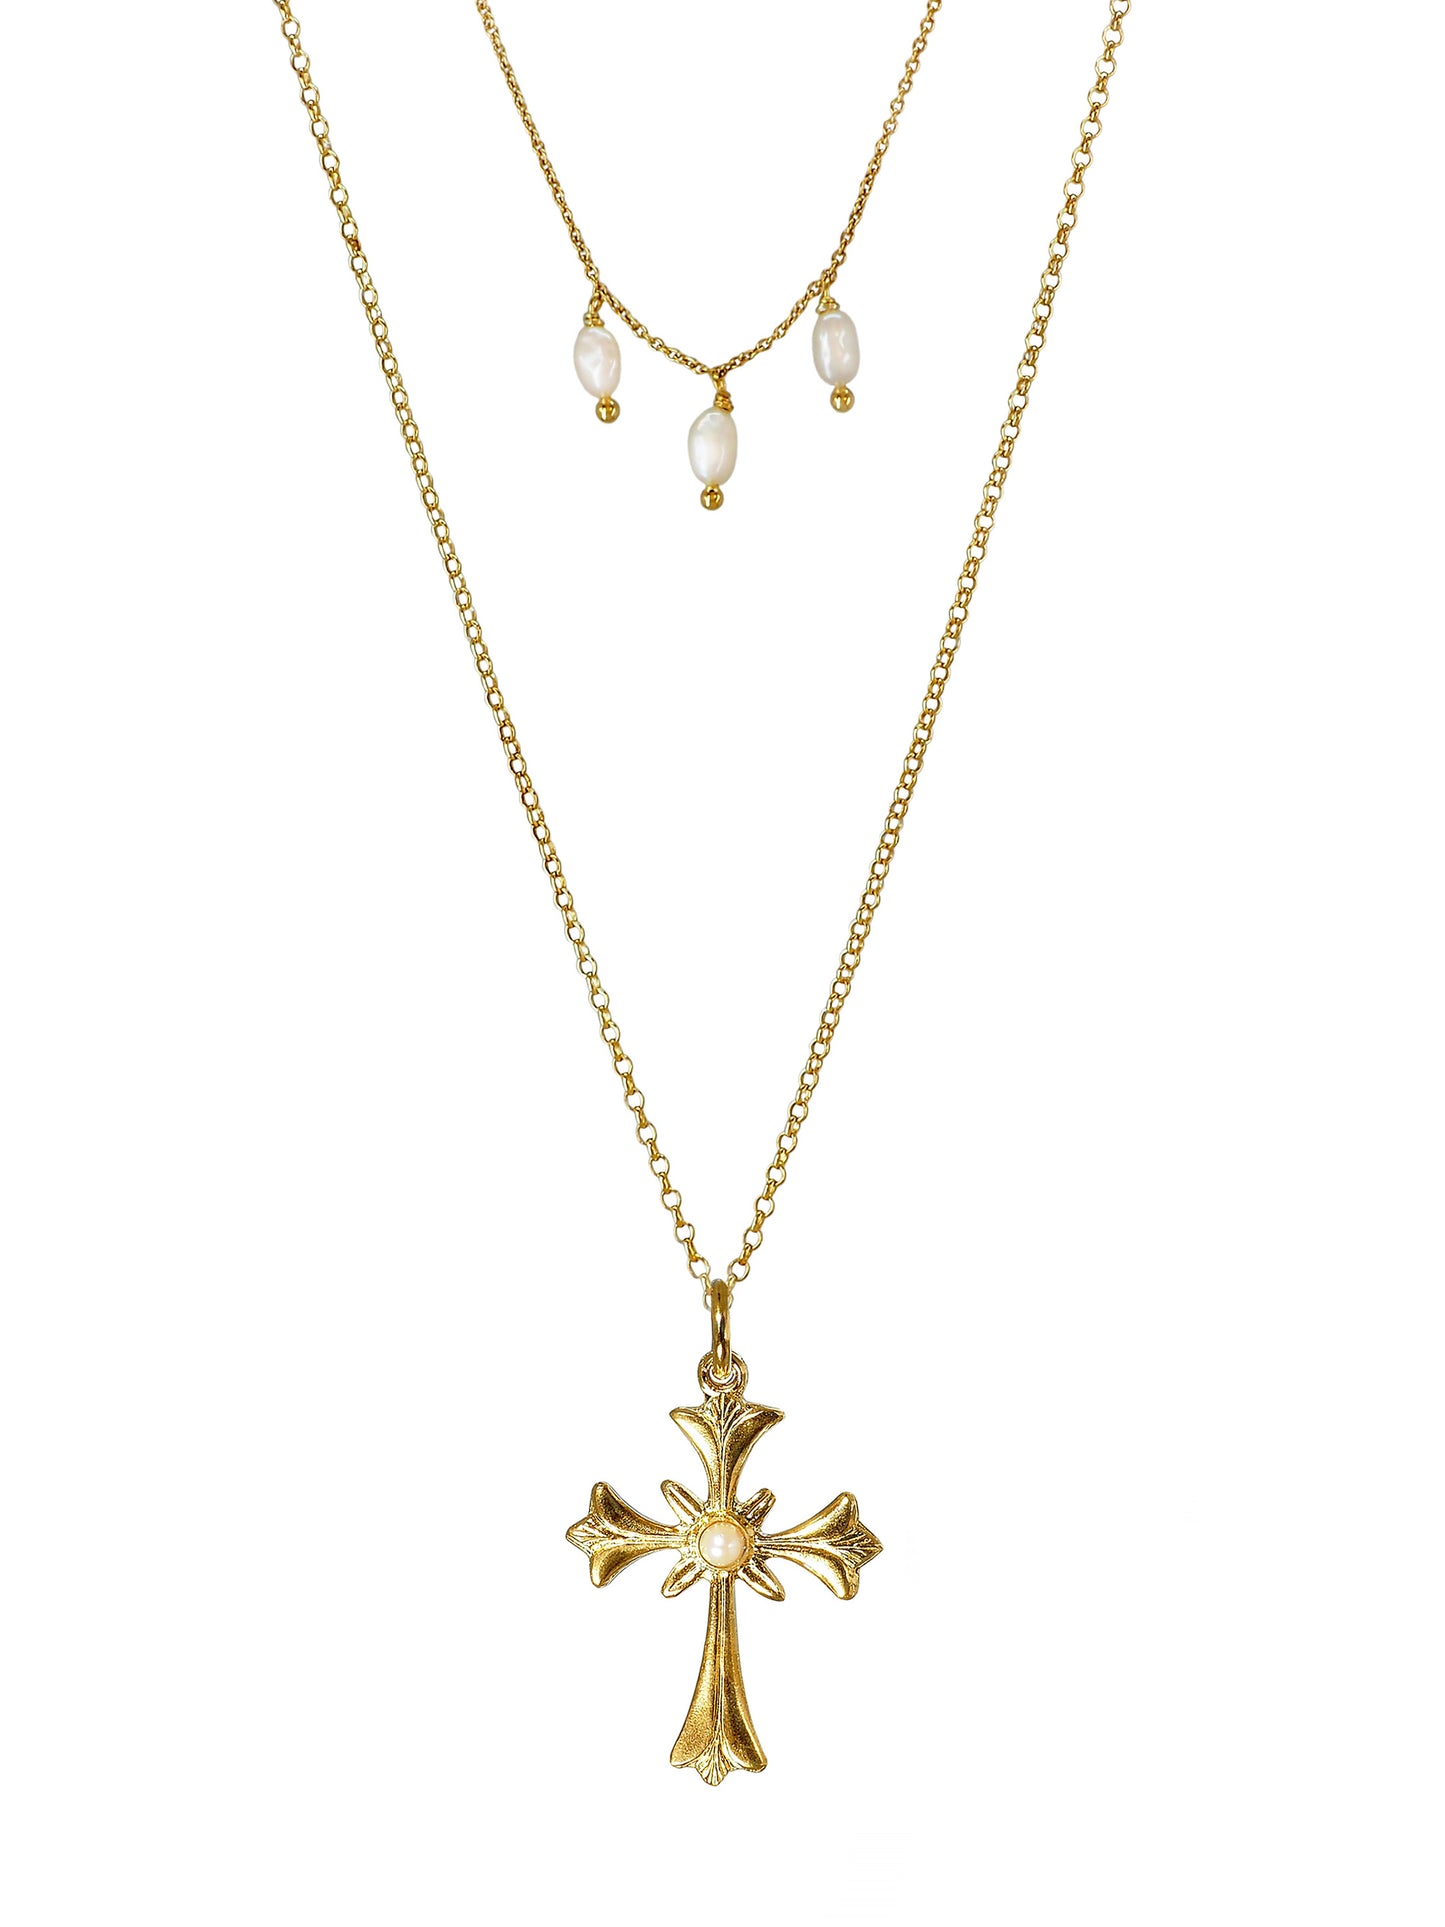 Cross necklace in Gold plated Silver, featuring japanese and baroque pearls